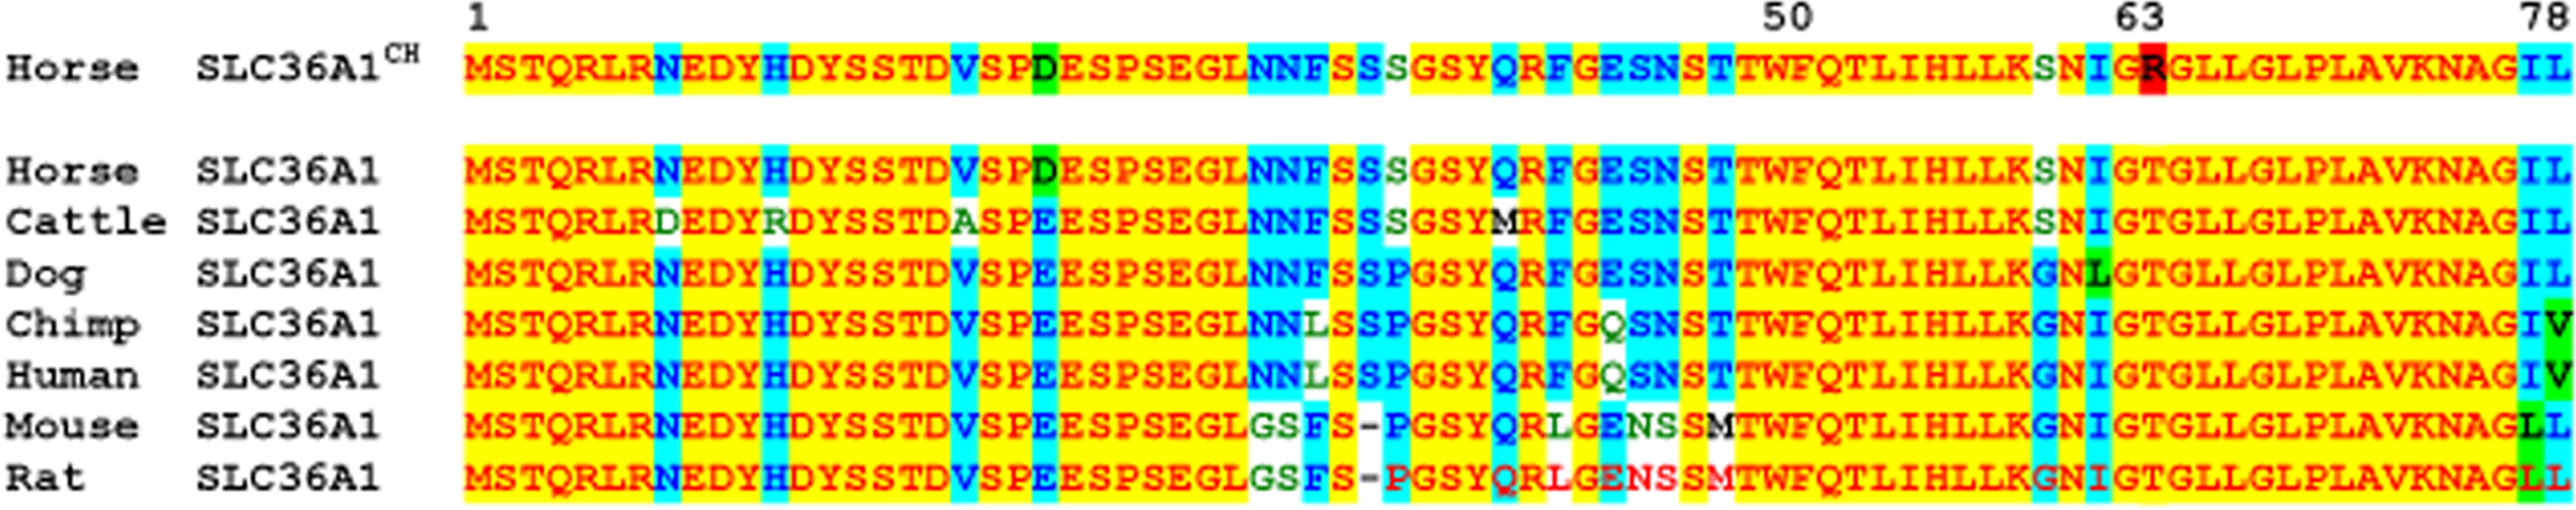 Seven Species Protein Sequence Alignment for <i>SLC36A1</i> exons 1 and 2.